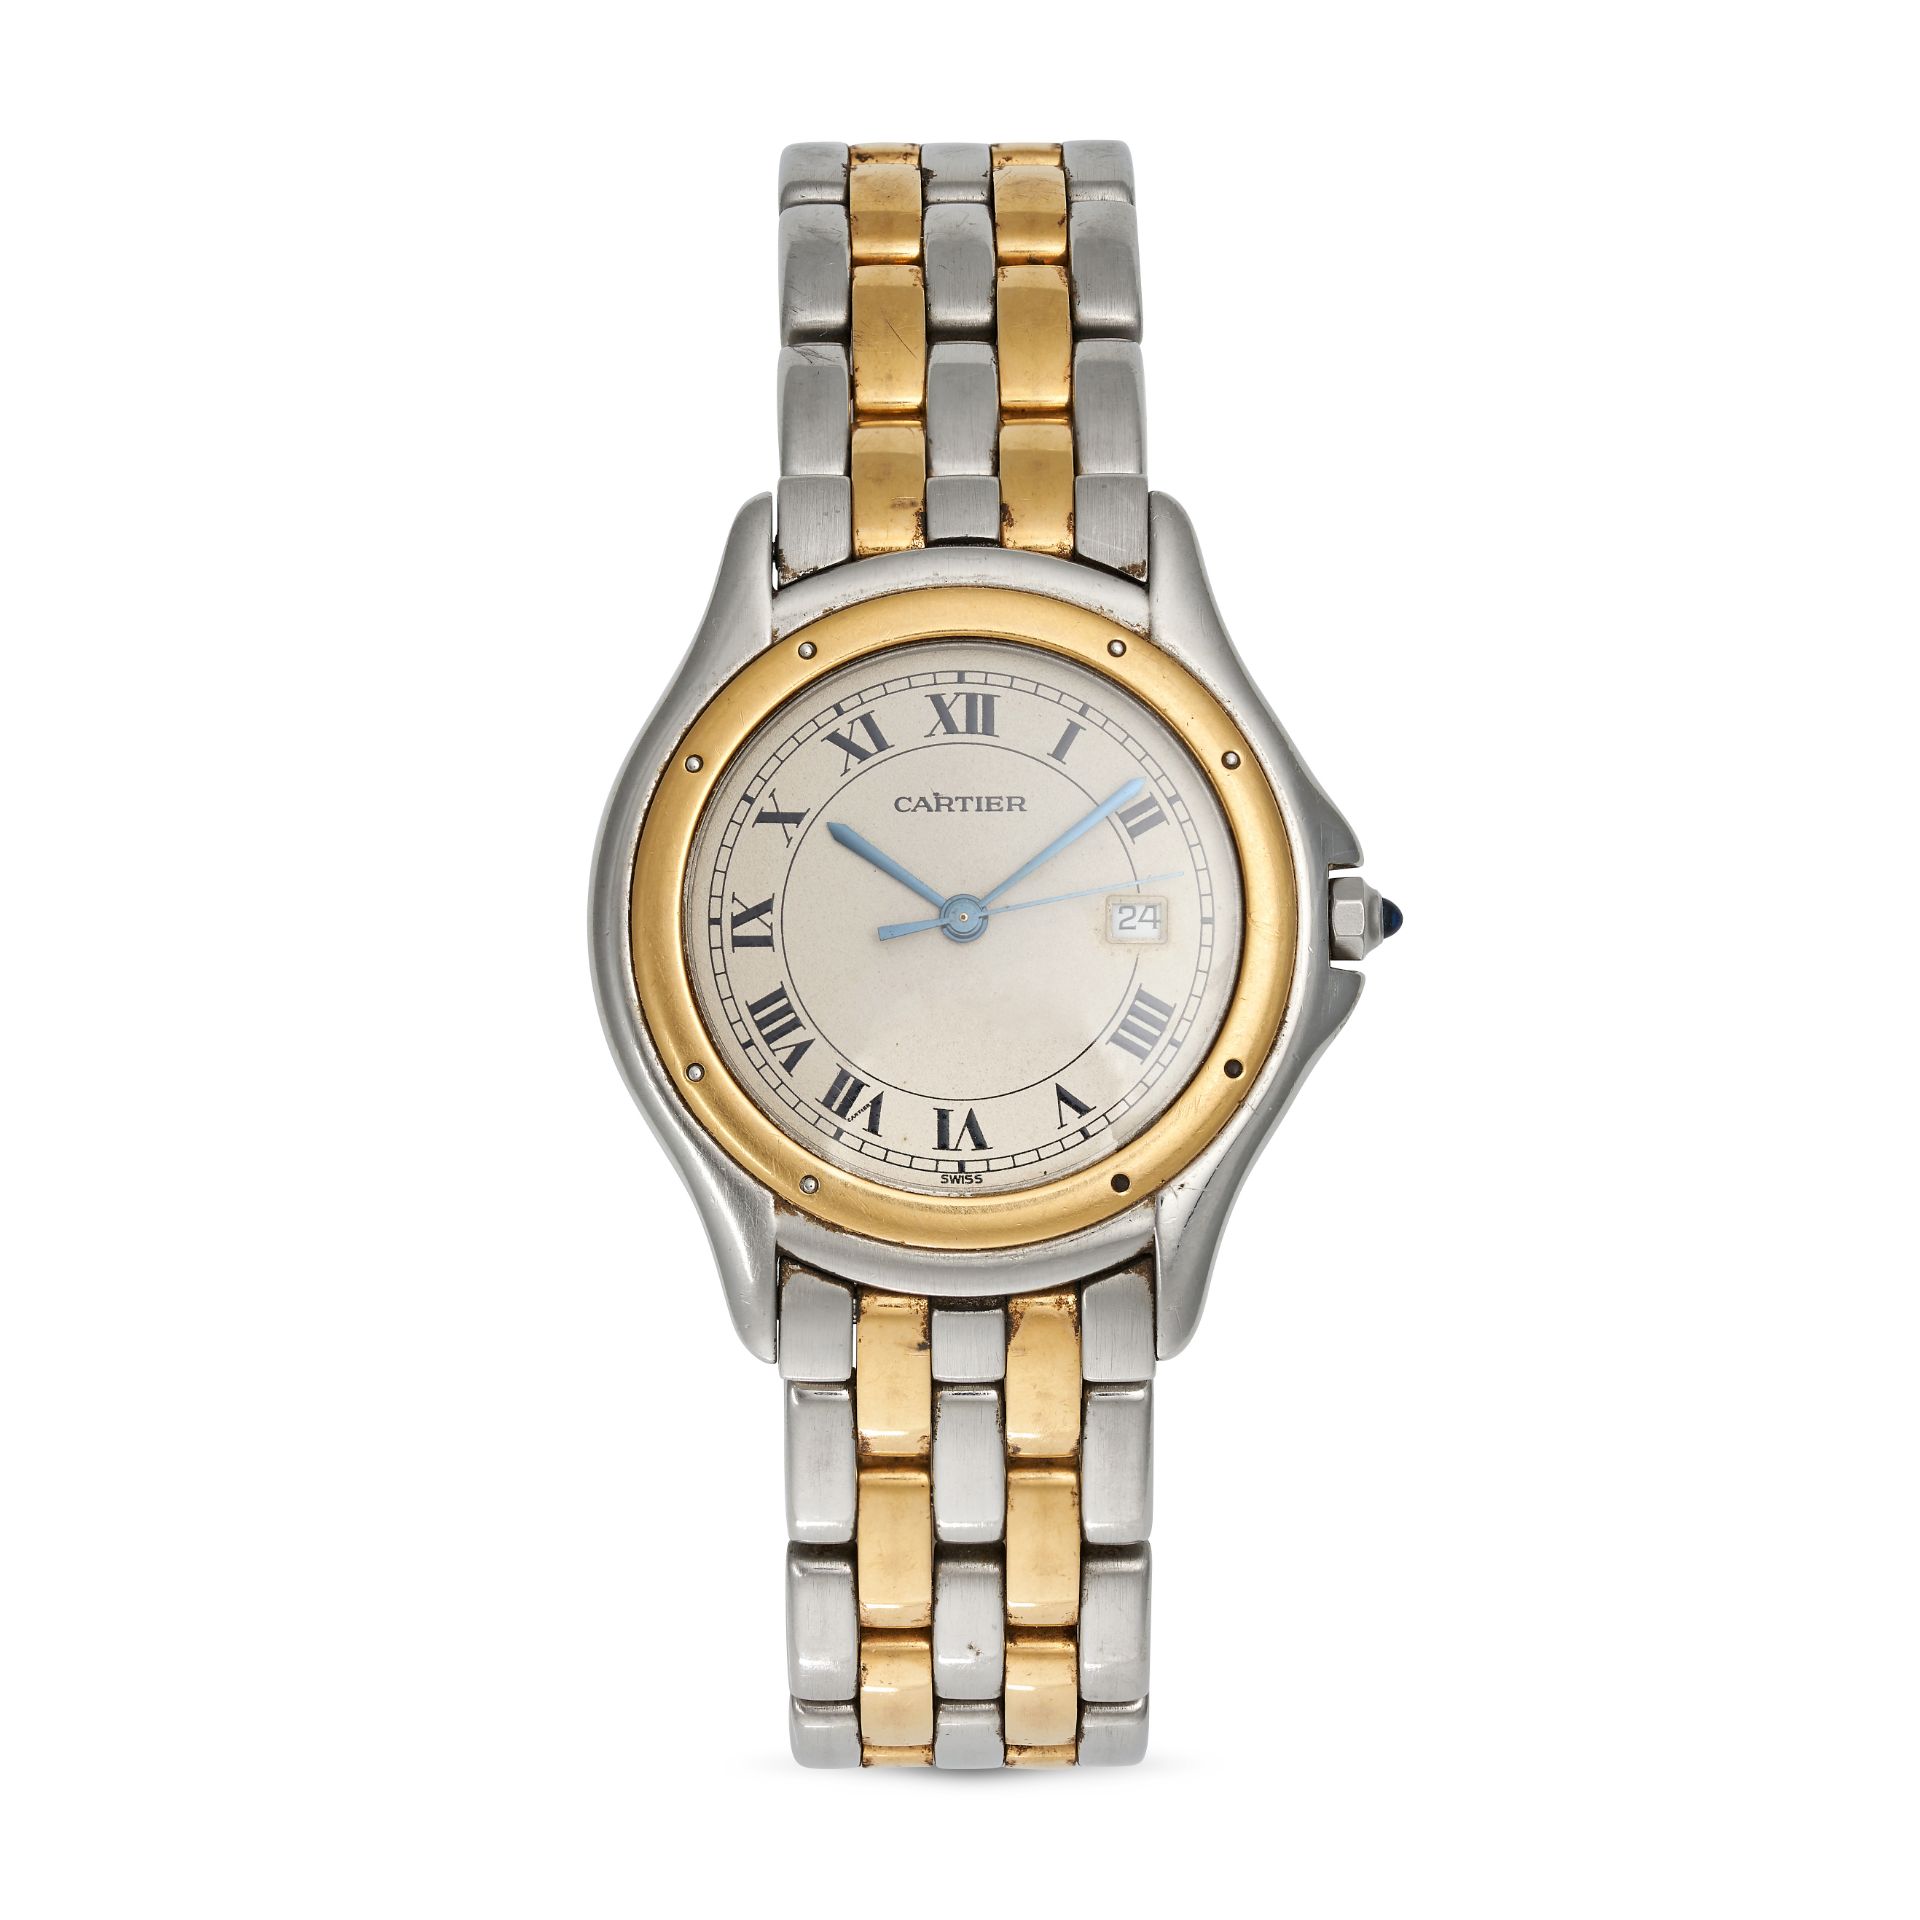 CARTIER - A BIMETAL CARTIER PANTHERE COUGAR in stainless steel and yellow gold, 187904, quartz mo...